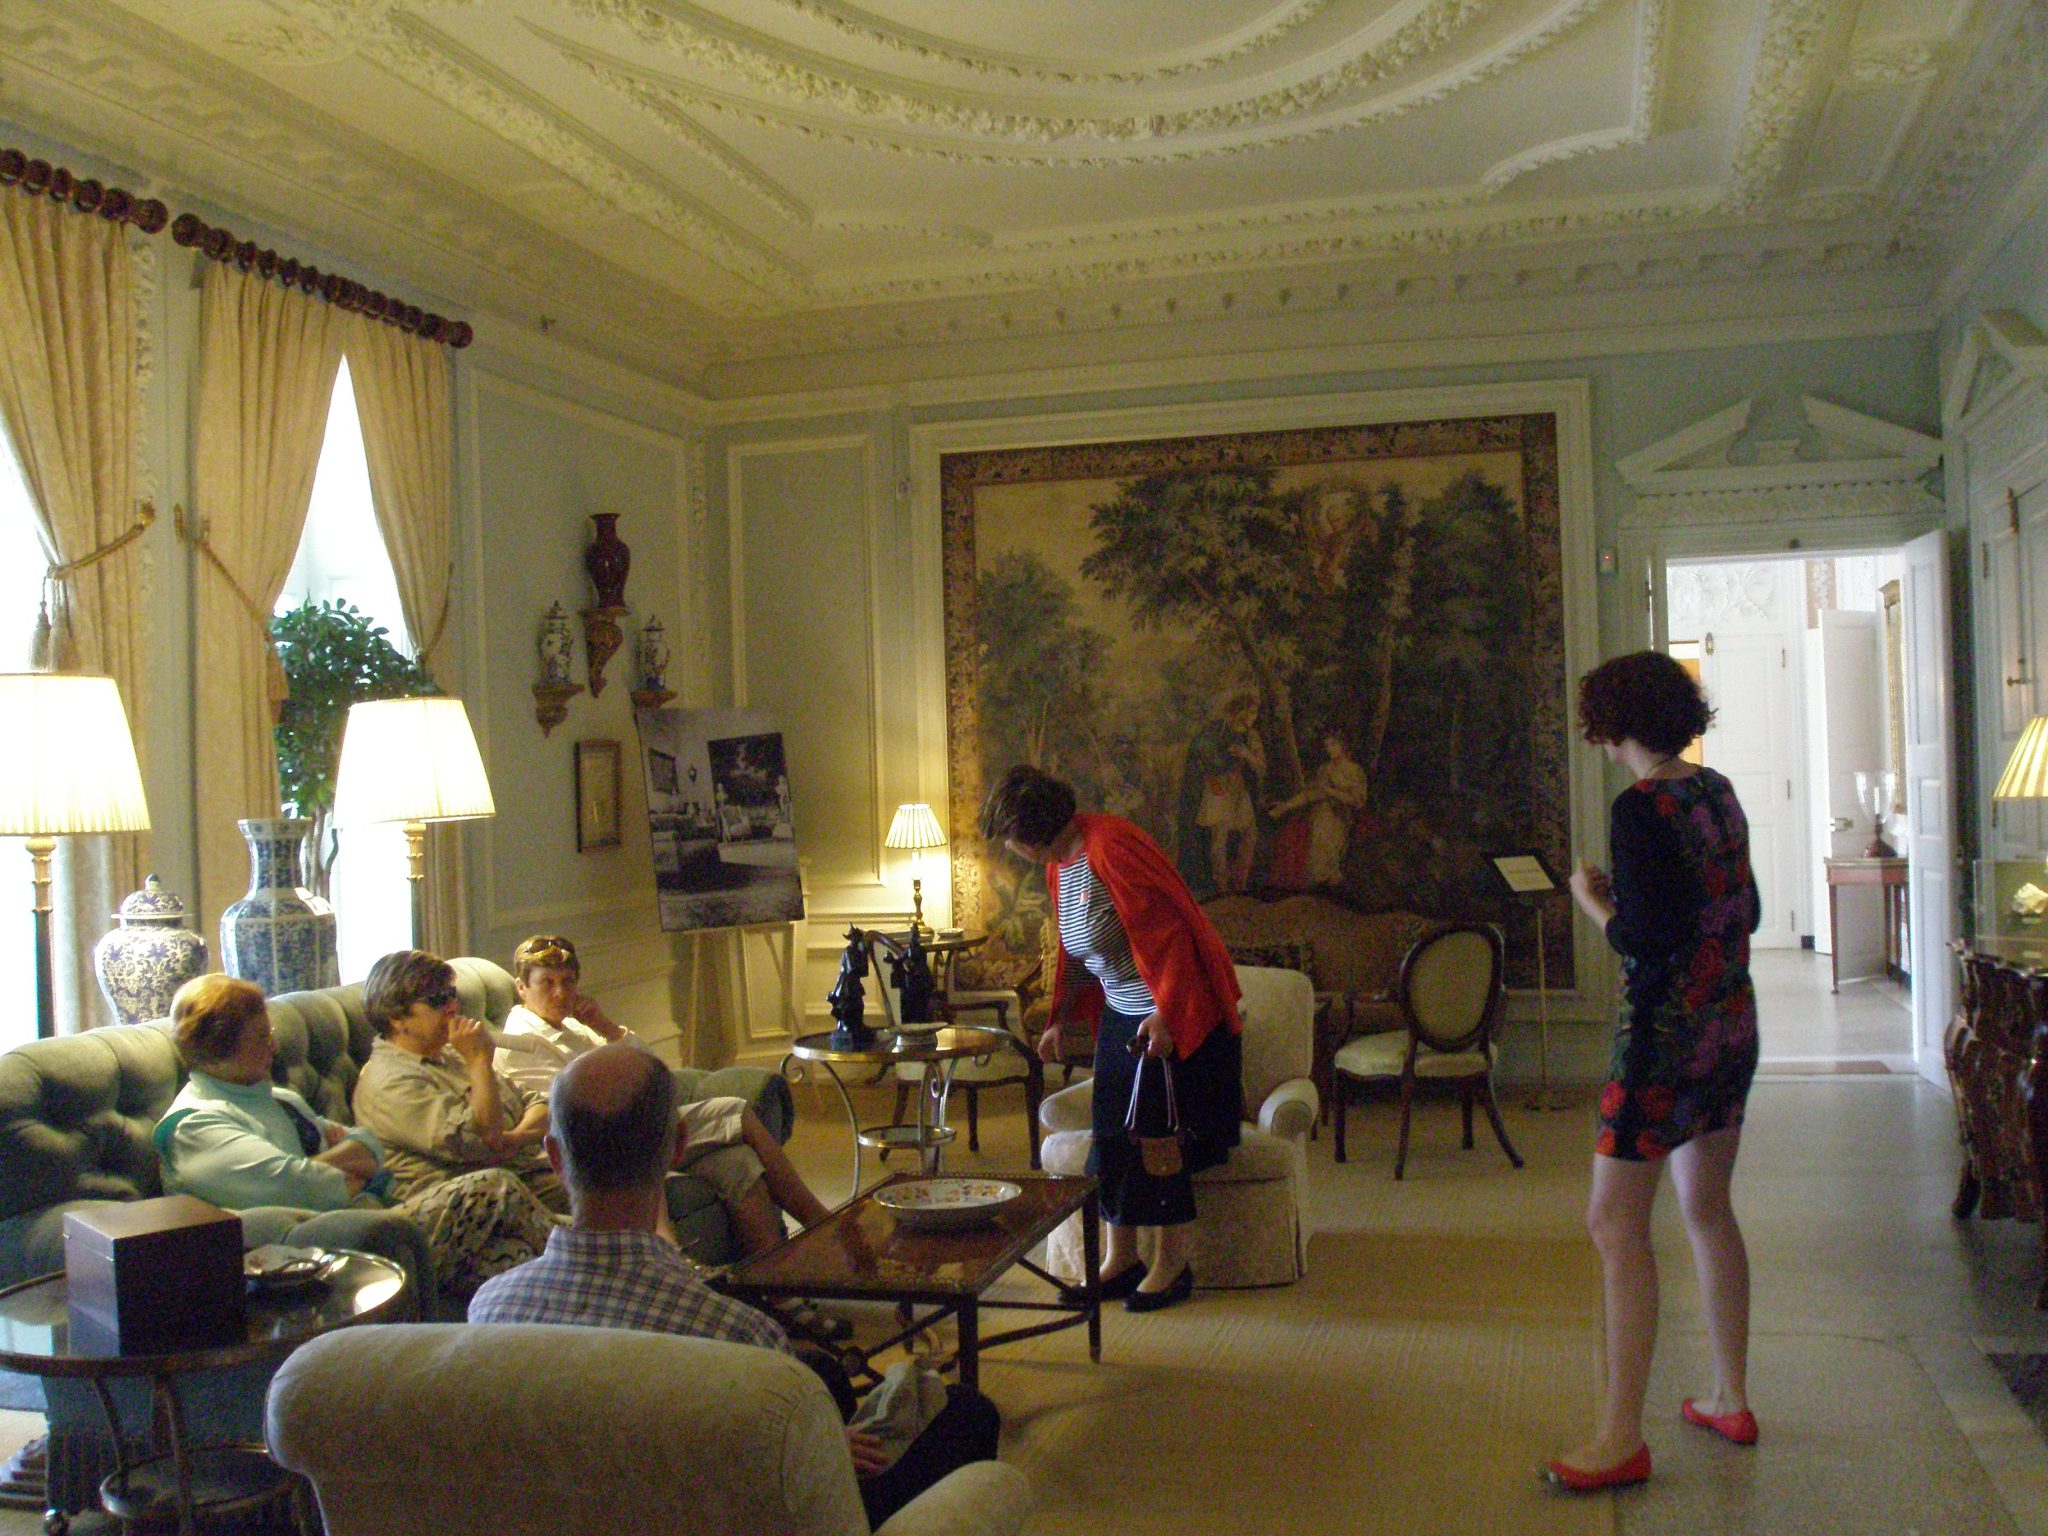 Drawing Room on the Main Floor. This is the largest room in the house, measuring 36 feet long by 20 feet wide. Brussels tapestries are set into the walls. 